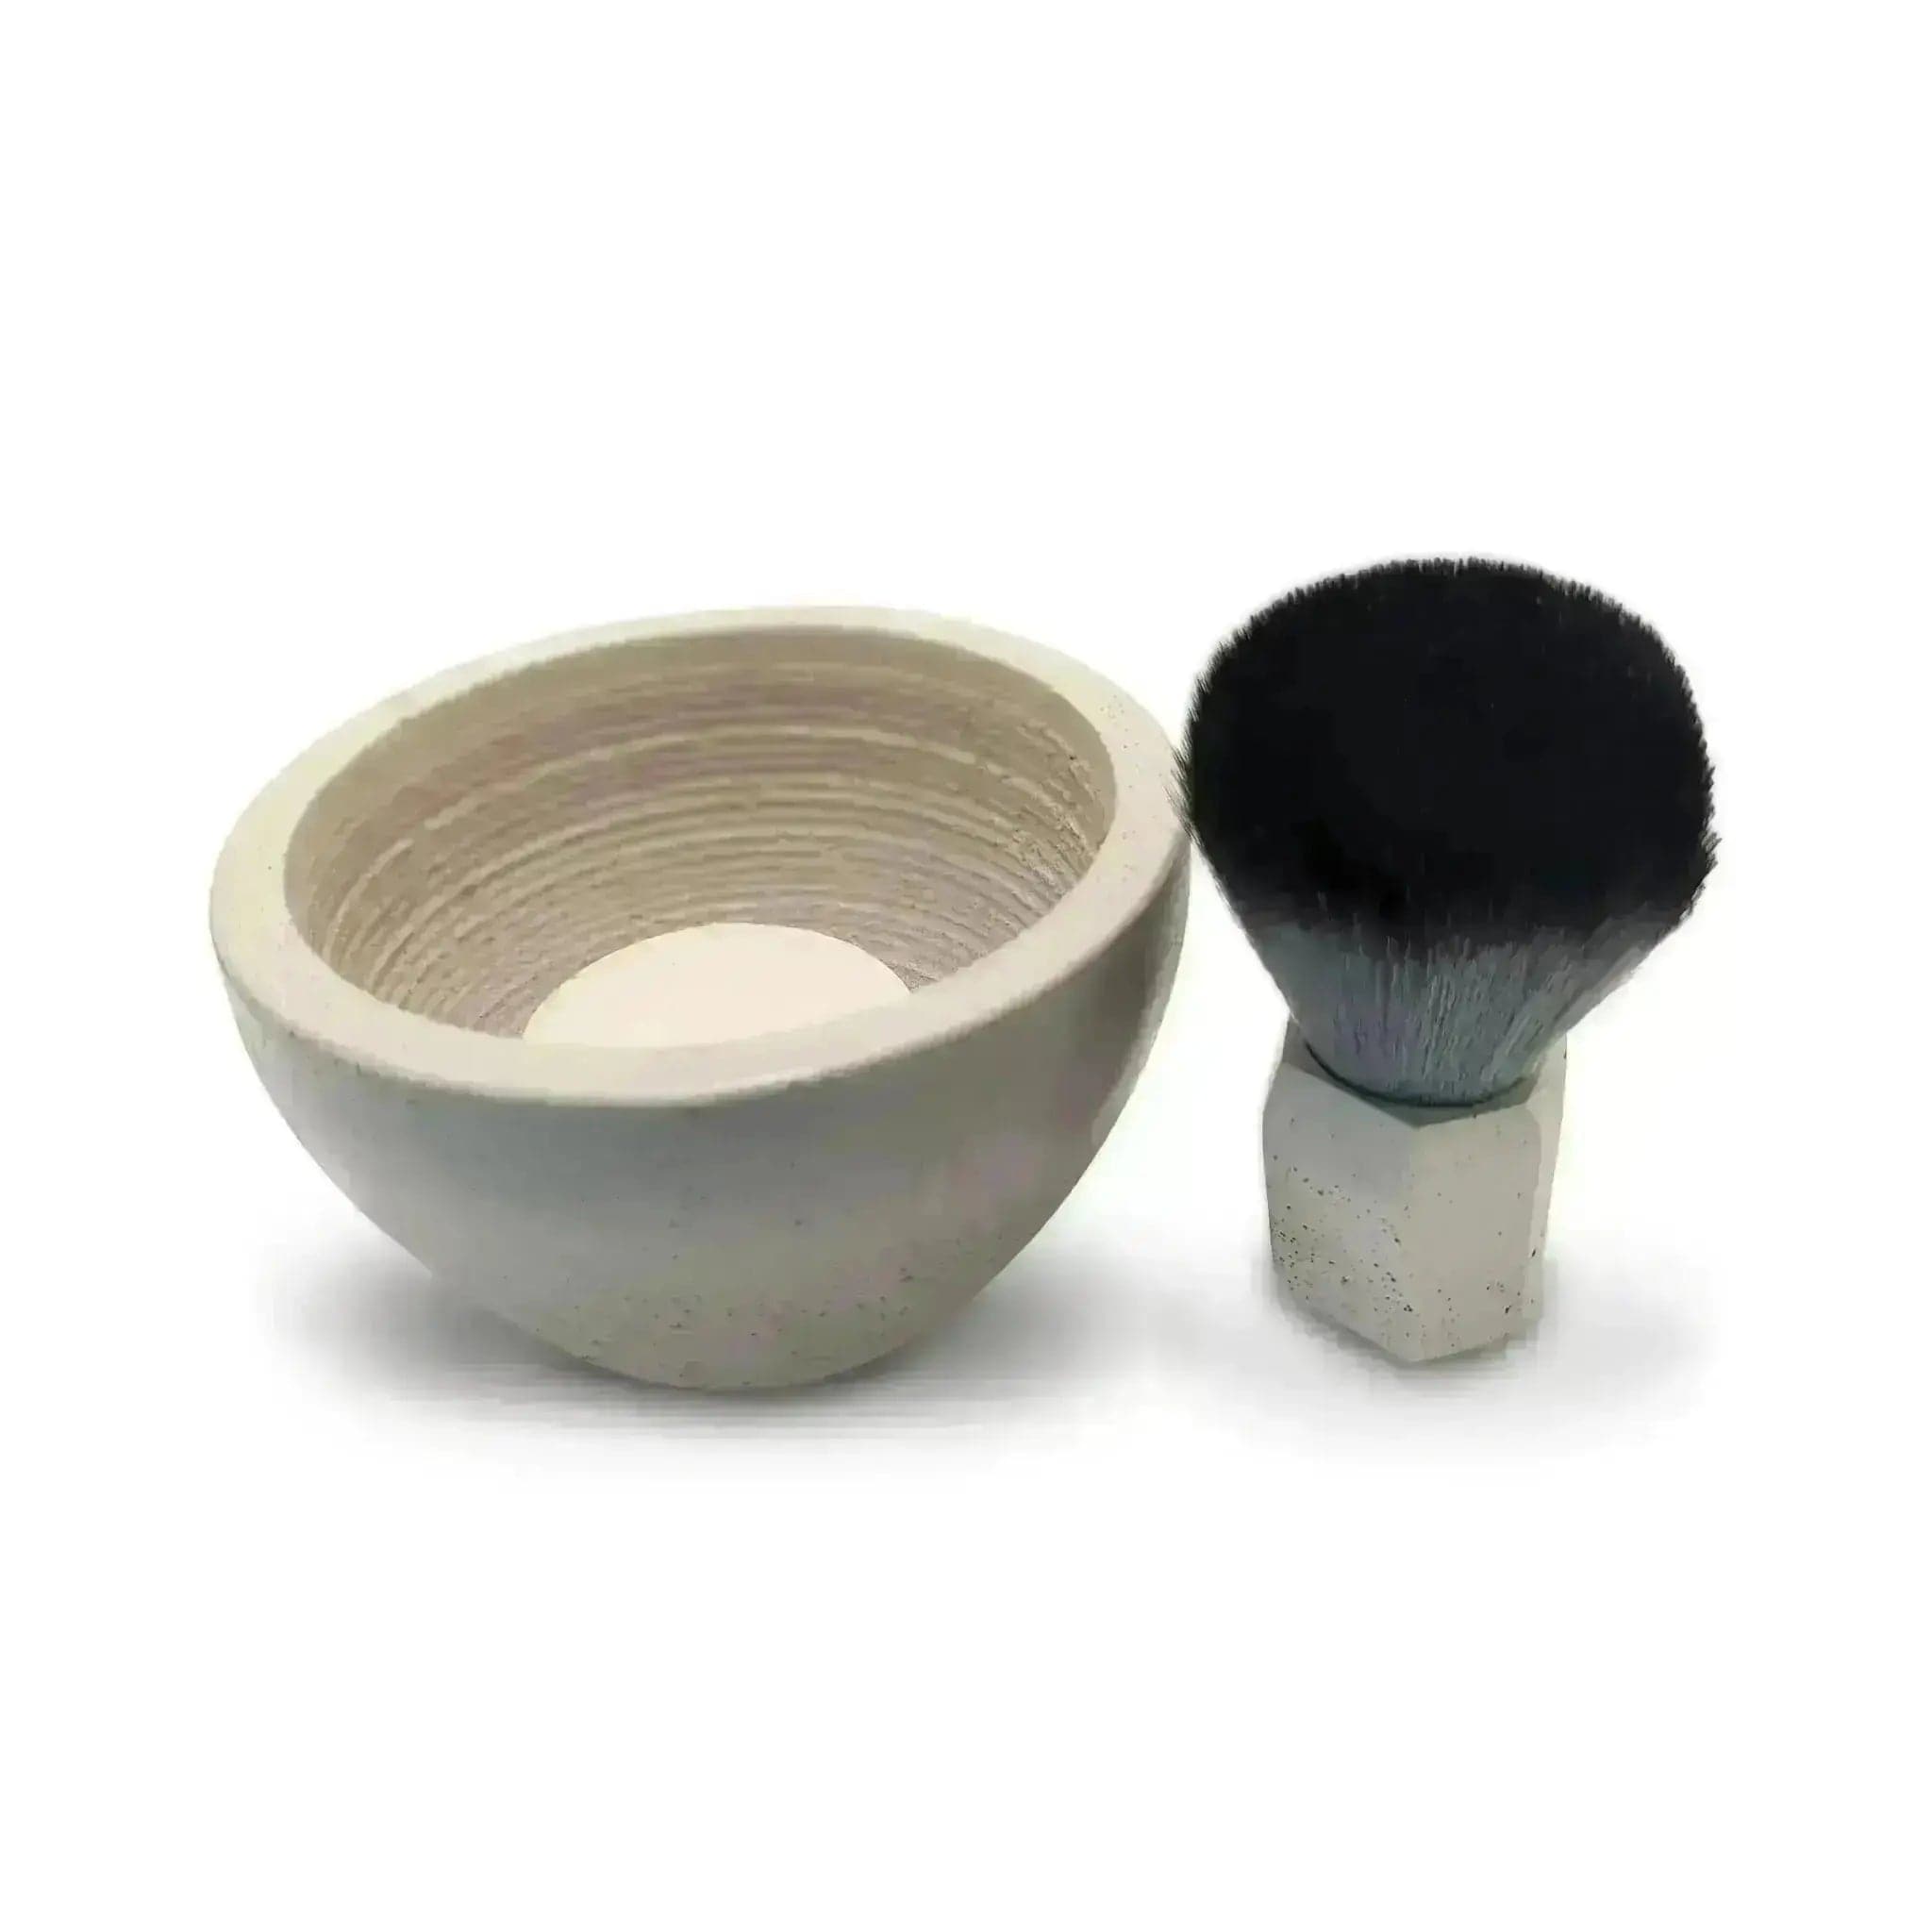 a white bowl with a black brush in it